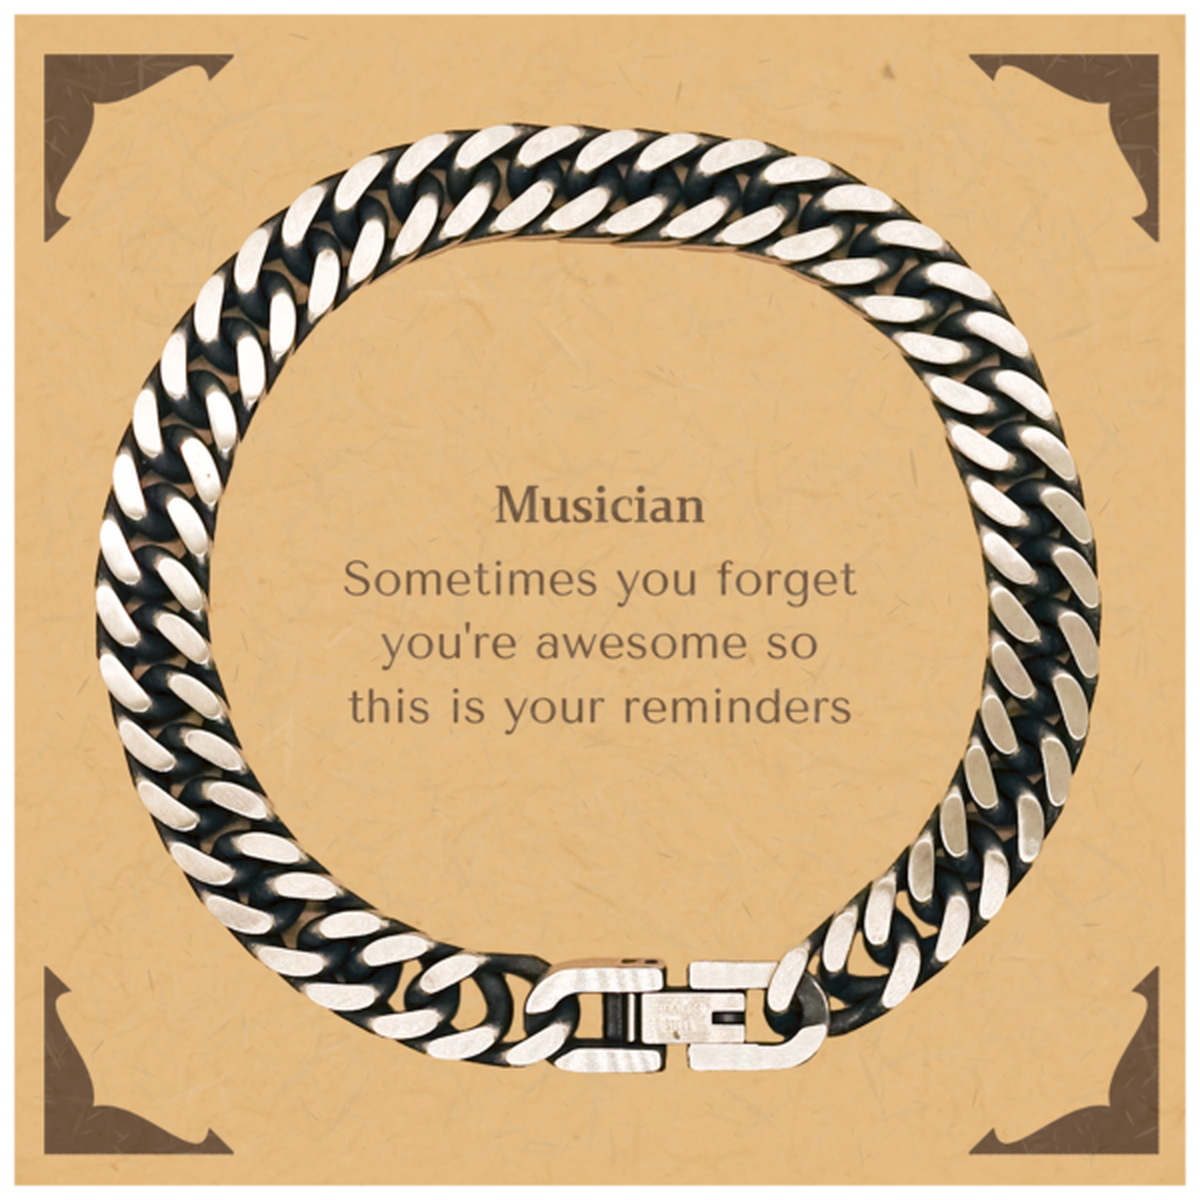 Sentimental Musician Cuban Link Chain Bracelet, Musician Sometimes you forget you're awesome so this is your reminders, Graduation Christmas Birthday Gifts for Musician, Men, Women, Coworkers